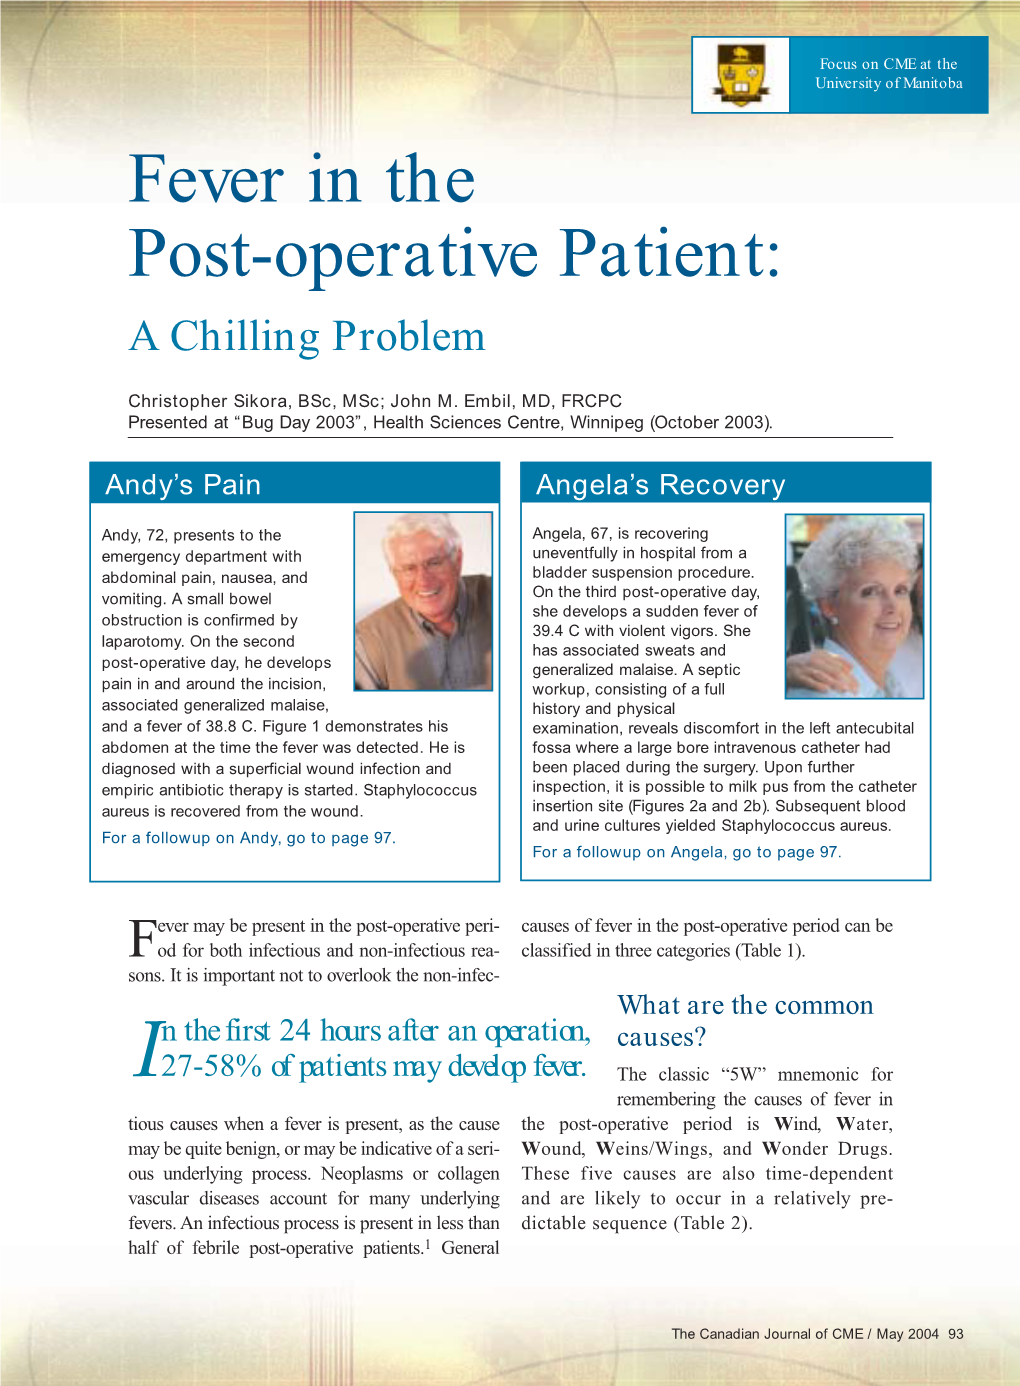 Fever in the Post-Operative Patient: a Chilling Problem